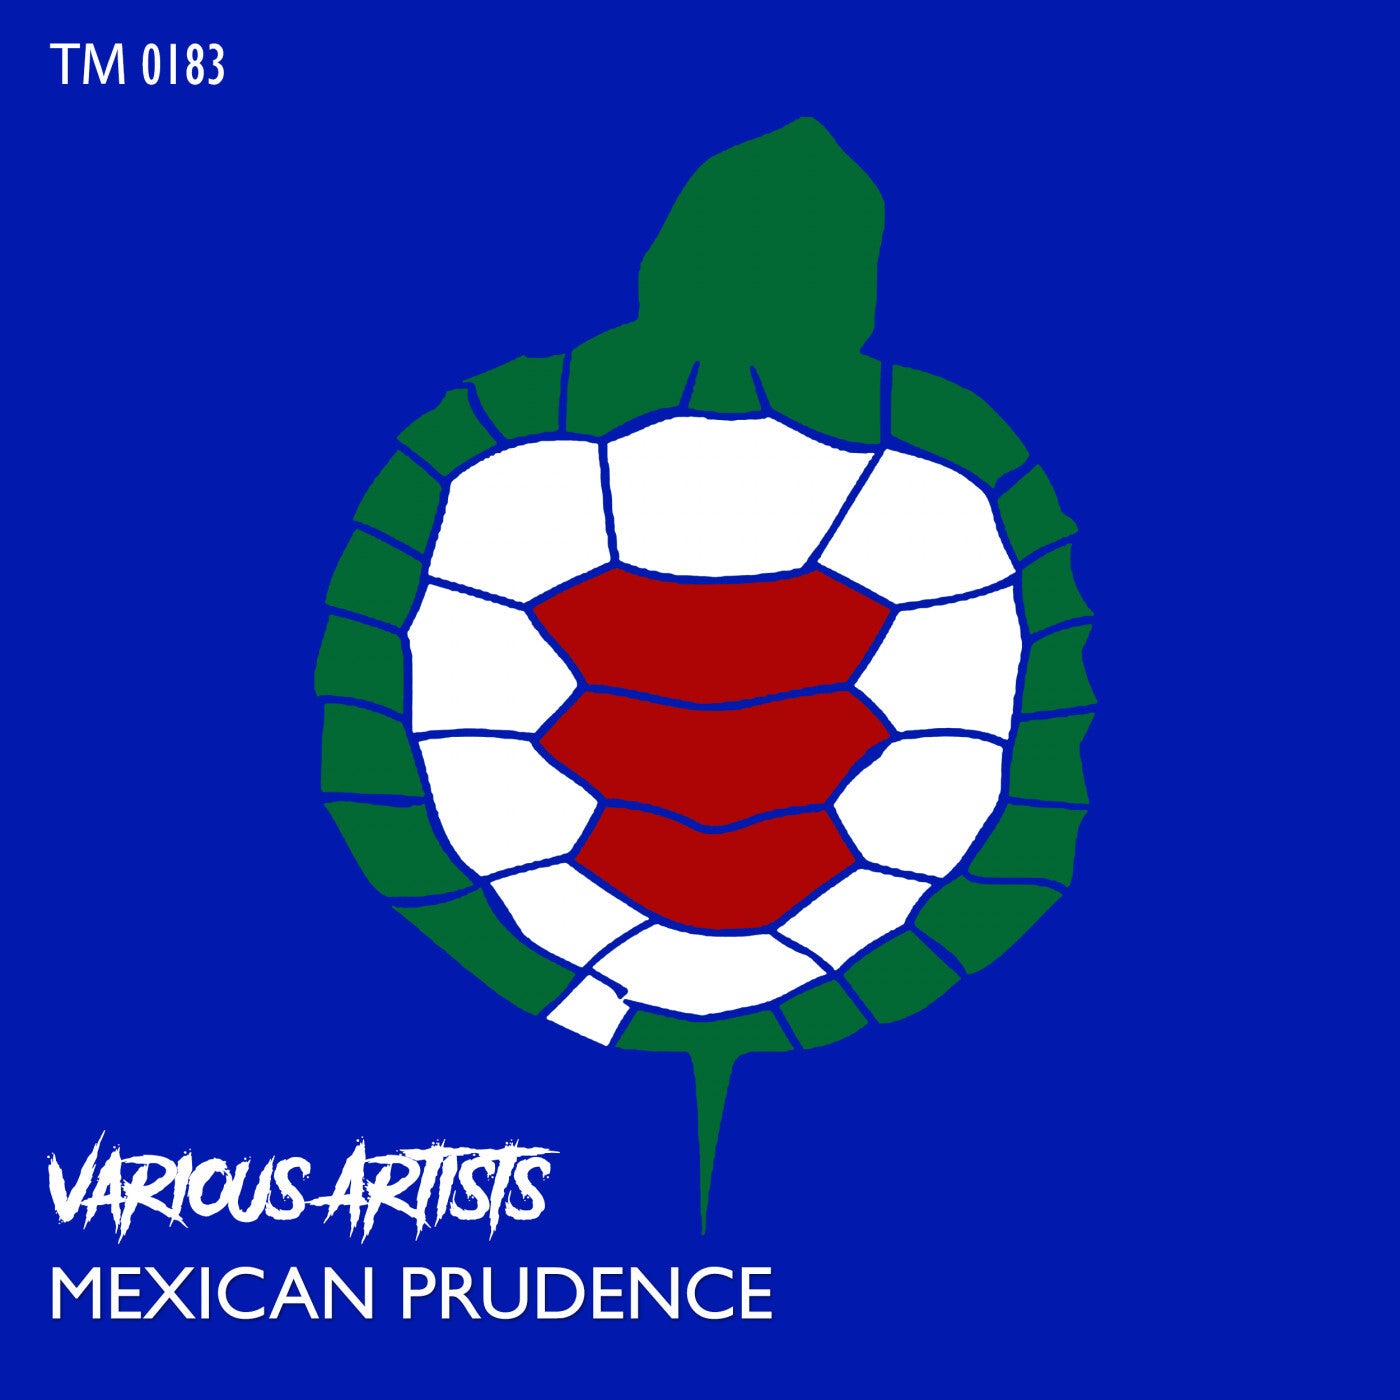 Mexican Prudence